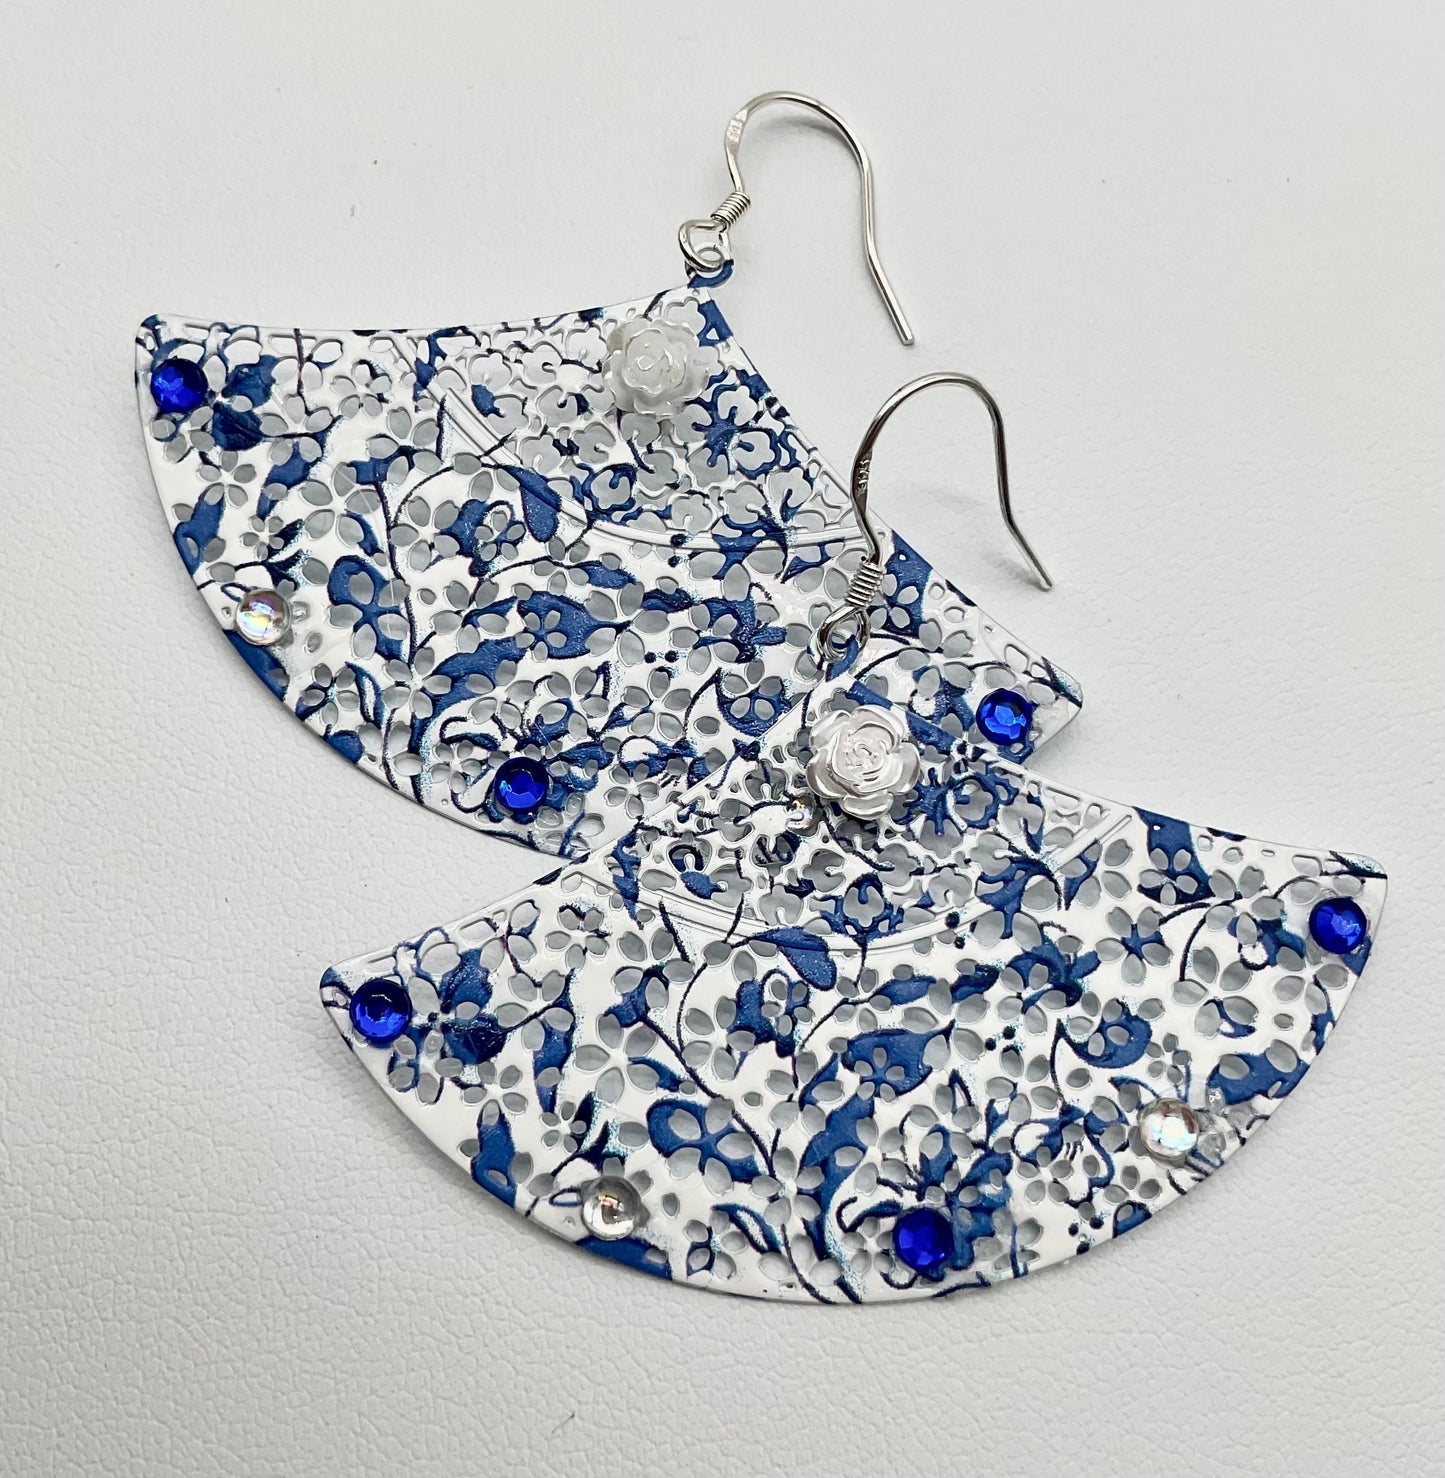 Blue and White Fan Shaped Dangle Earrings with AB Crystal Accents